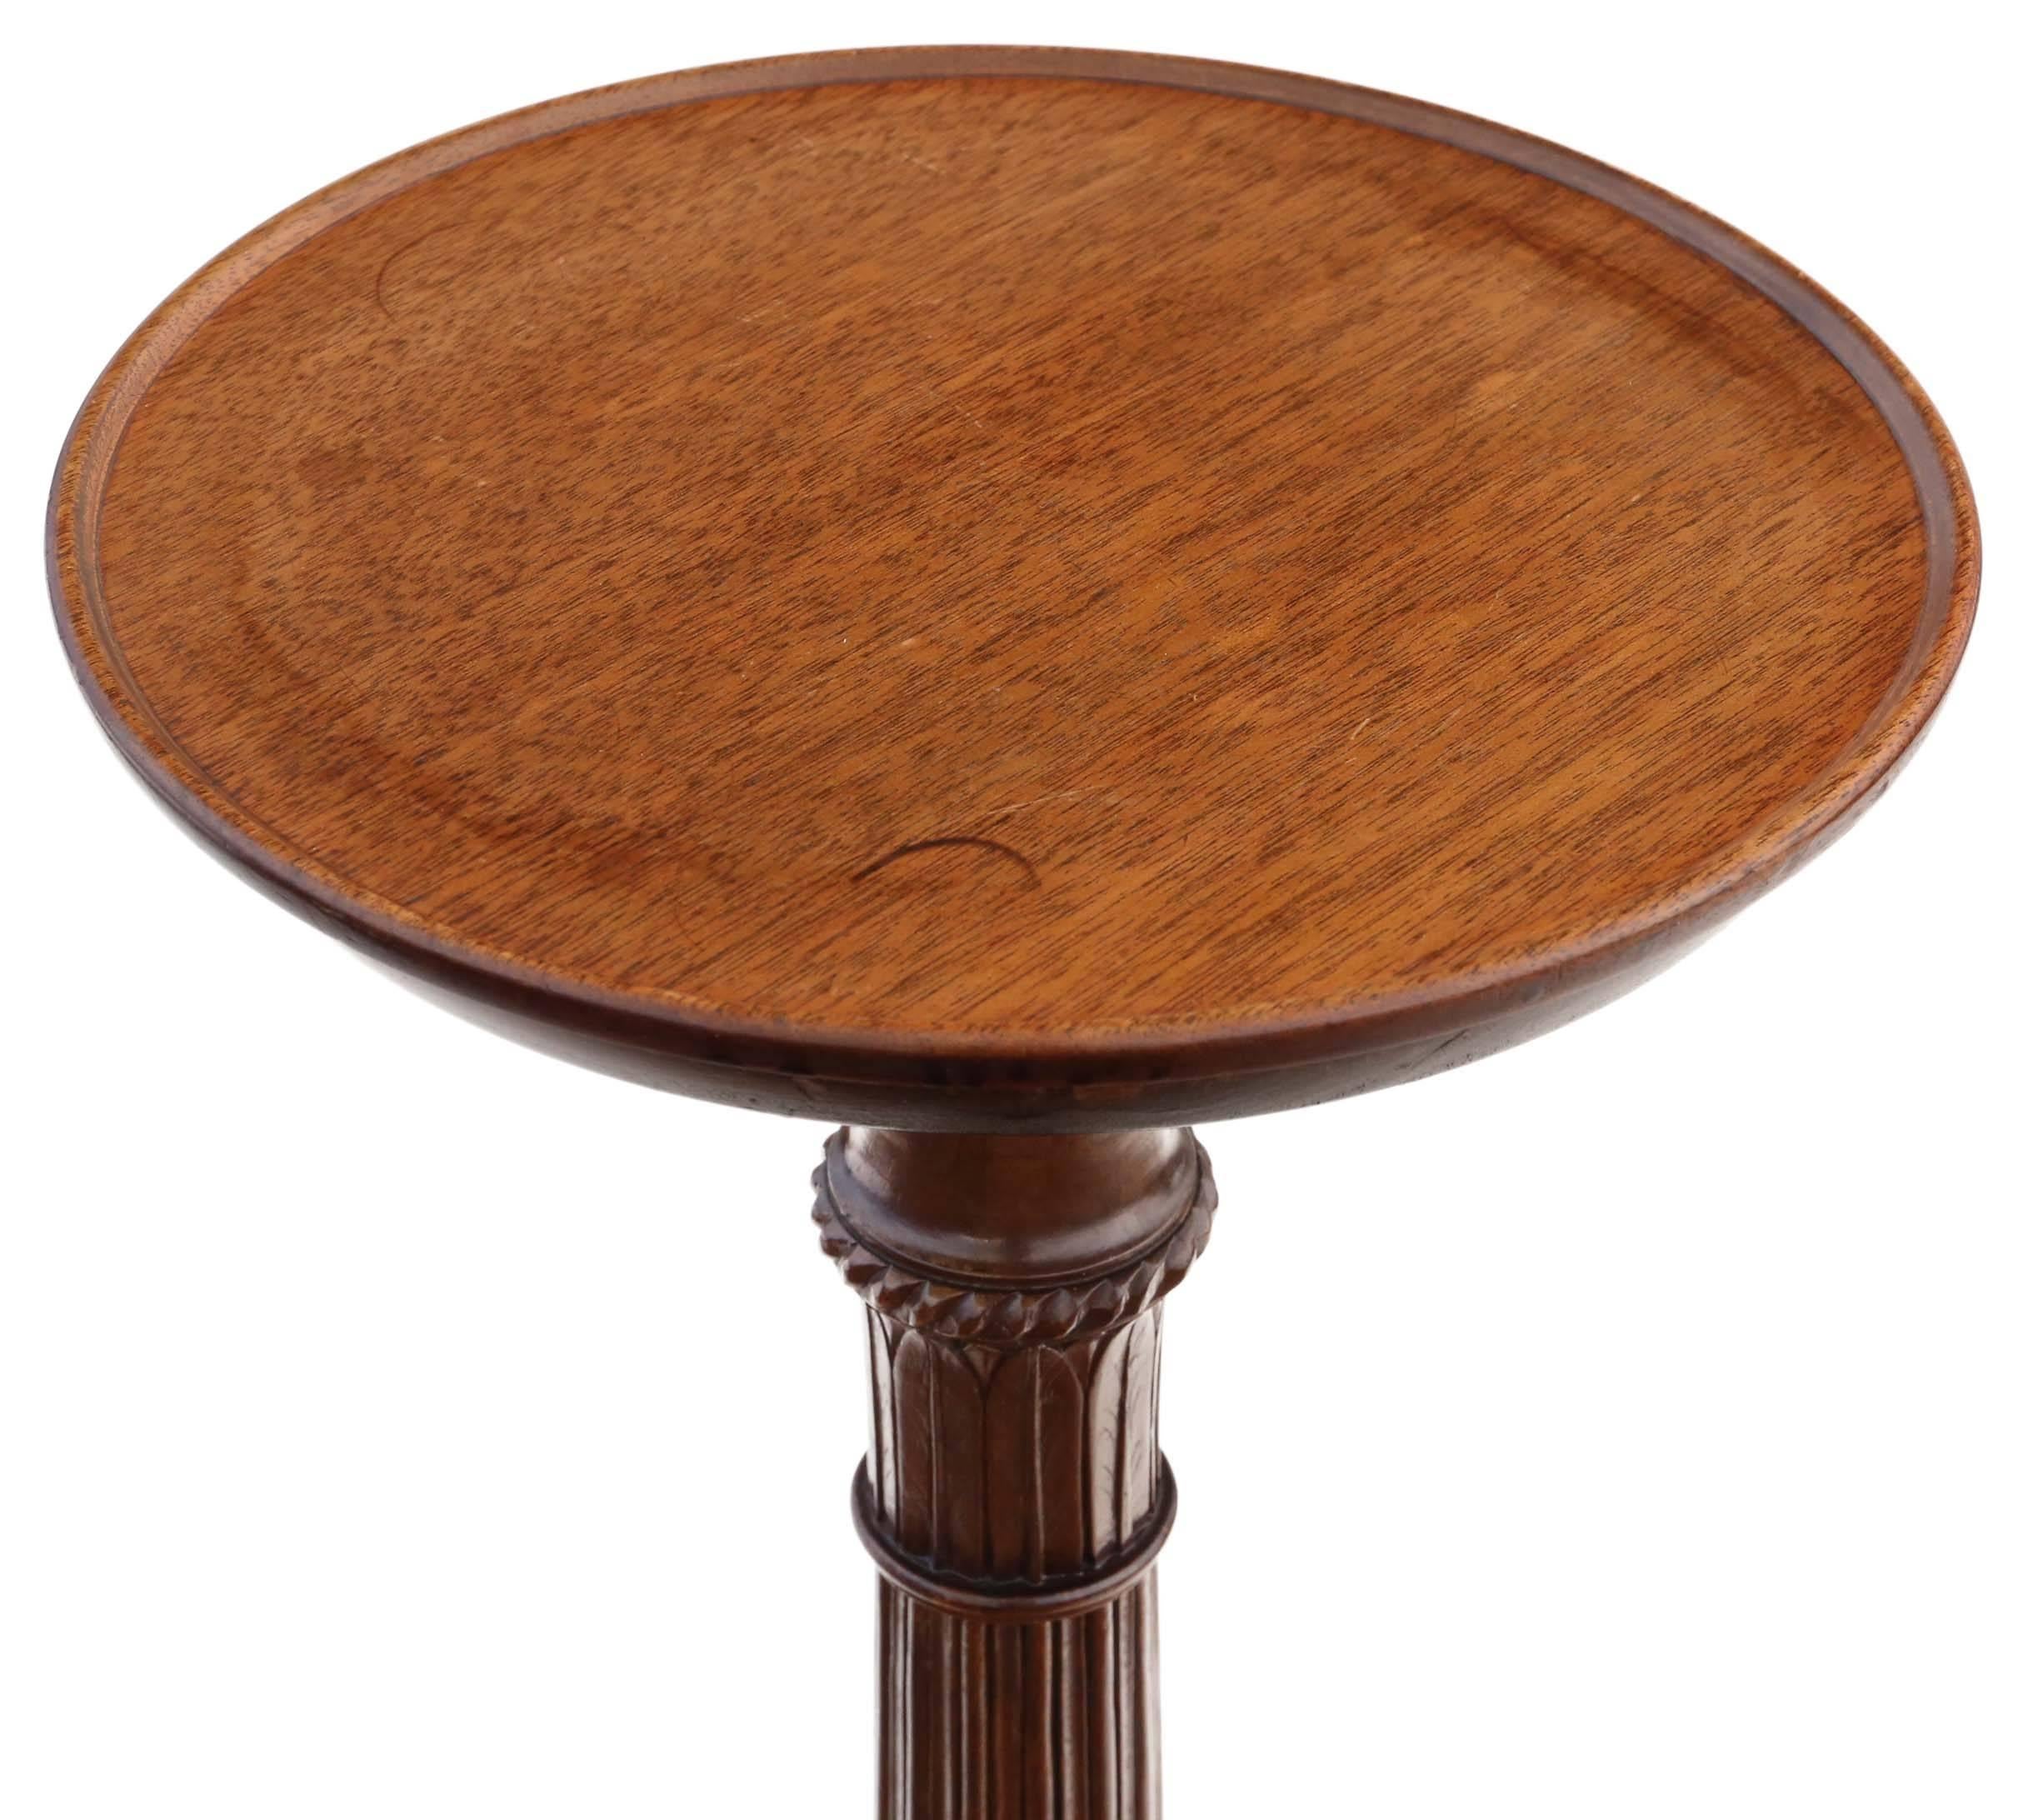 Antique late Victorian, circa 1900 mahogany torchiere or jardiniere table pedestal stand.

This item is fine quality, solid and heavy, with no loose joints. Very stable.

No woodworm.

An attractive piece with a lovely fluted stem and a